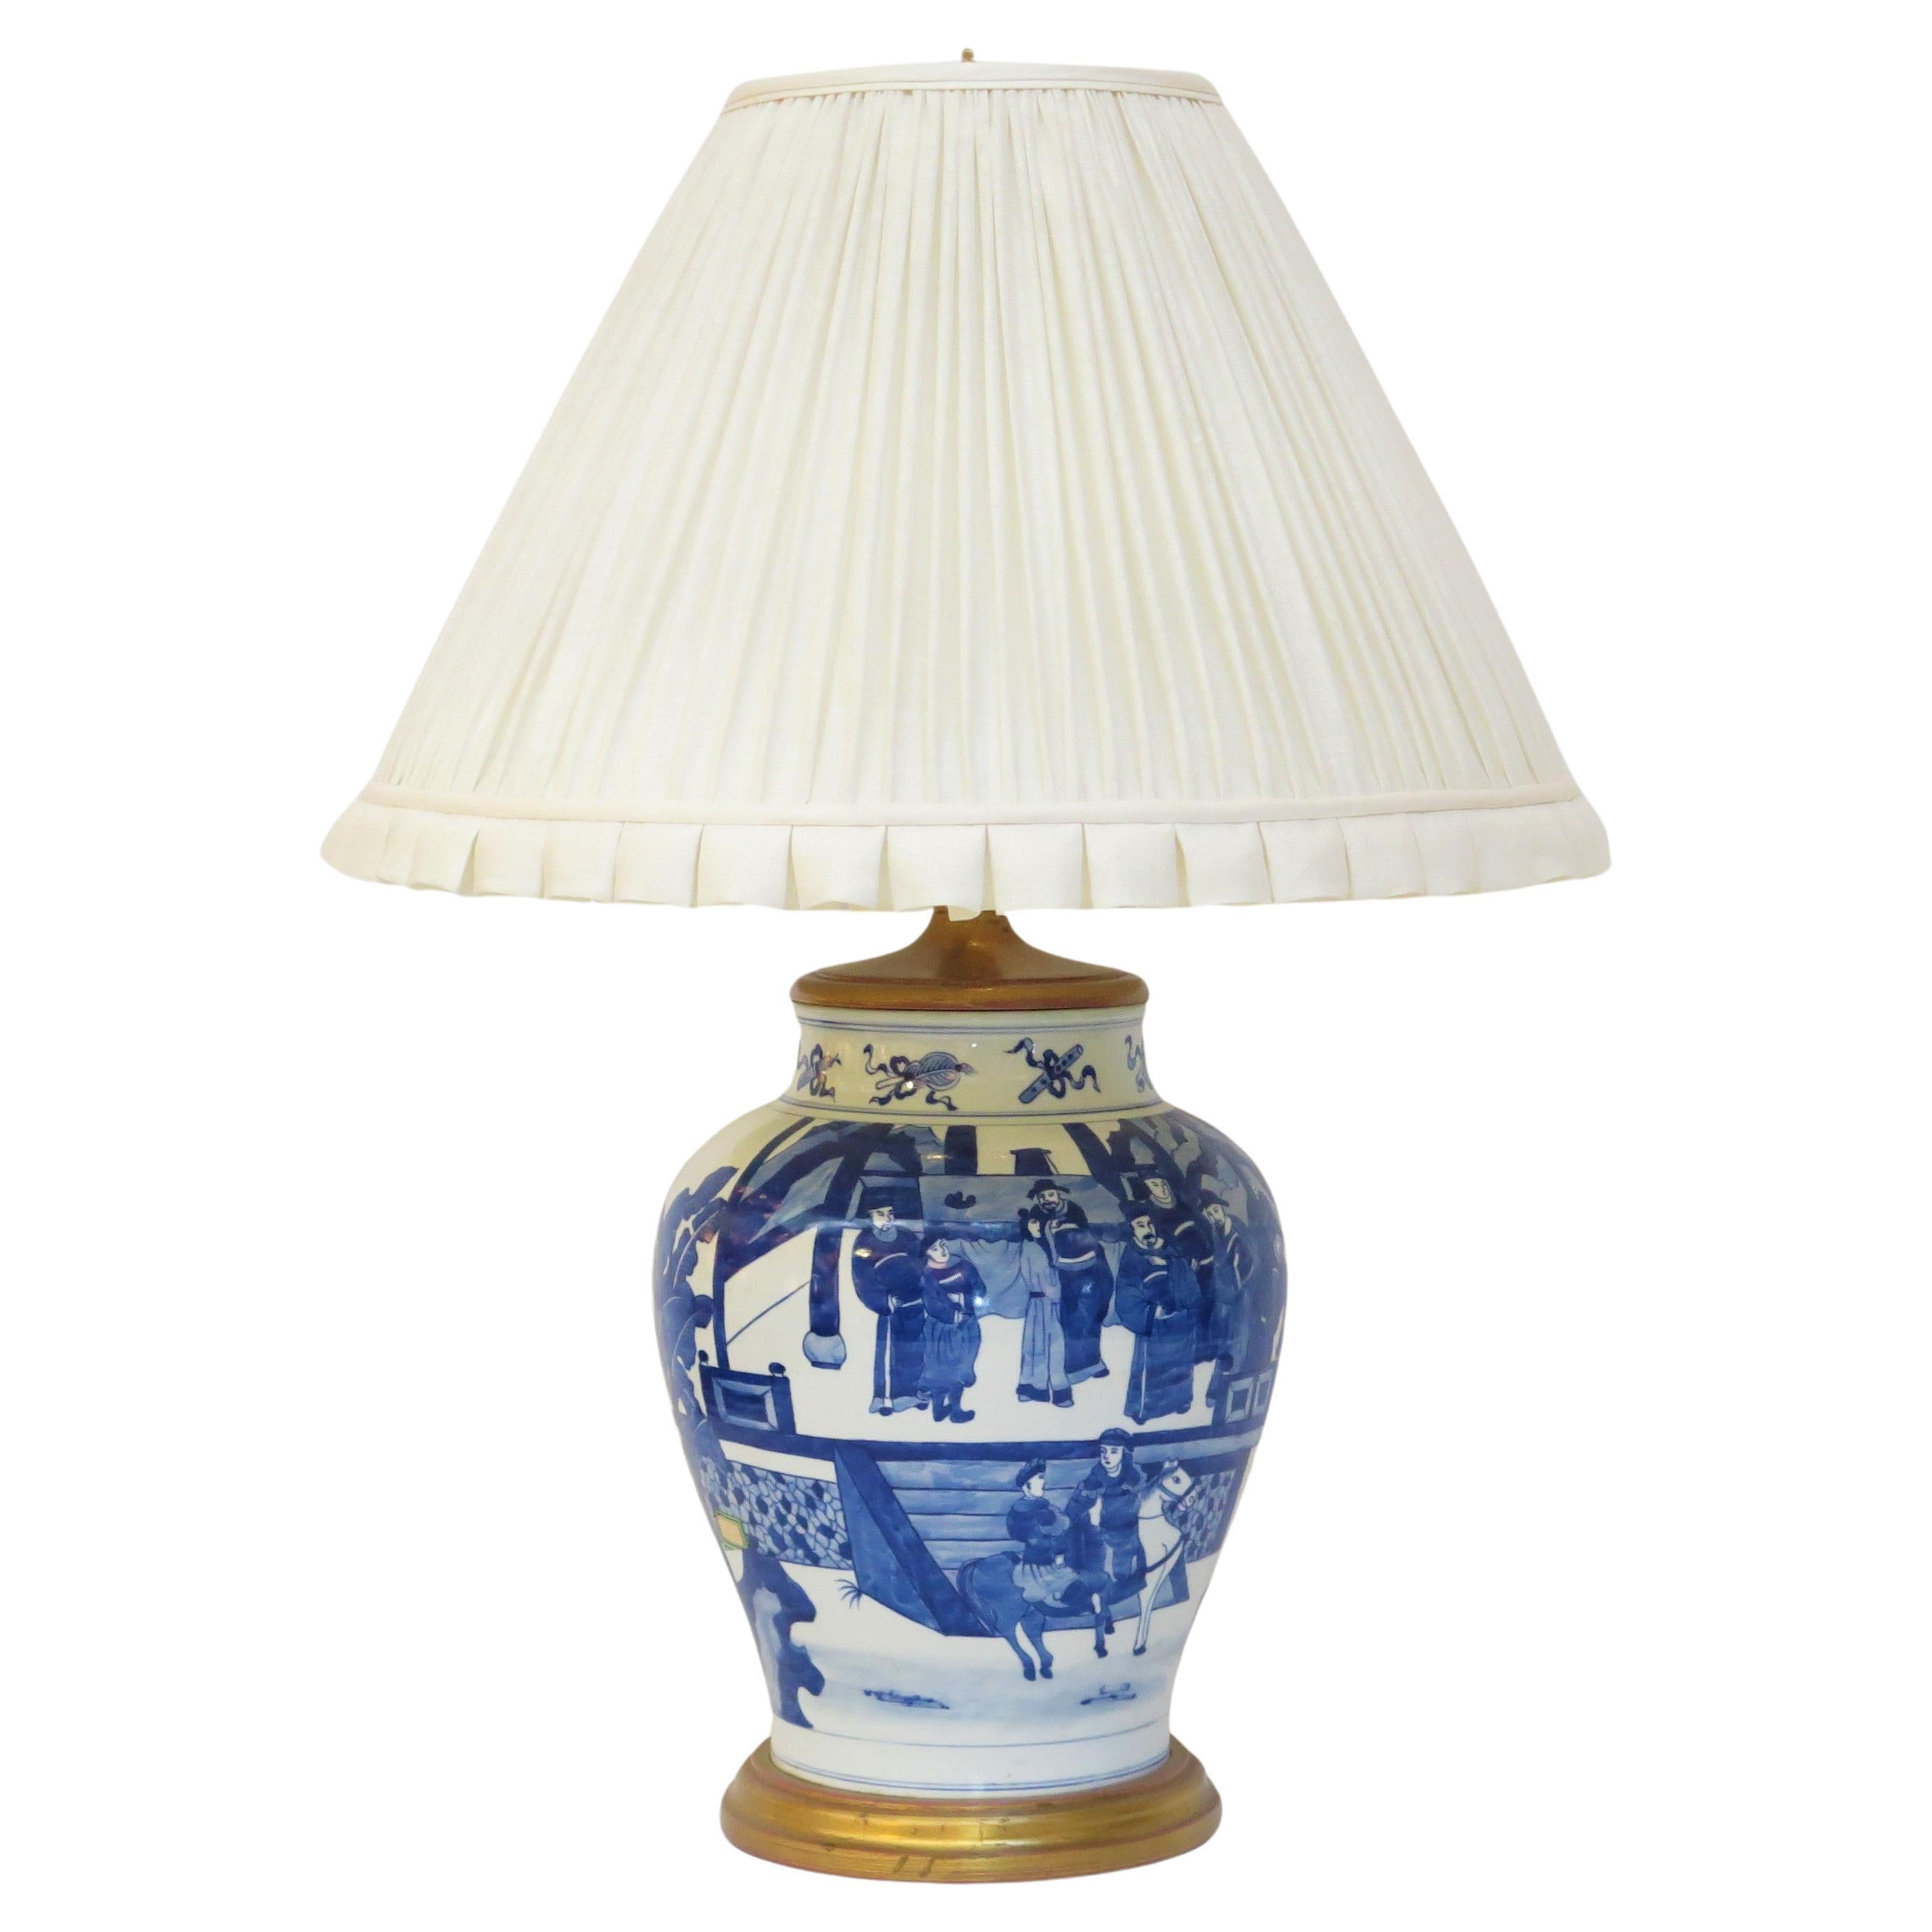 A Blue and White Chinese Porcelain Lamp For Sale